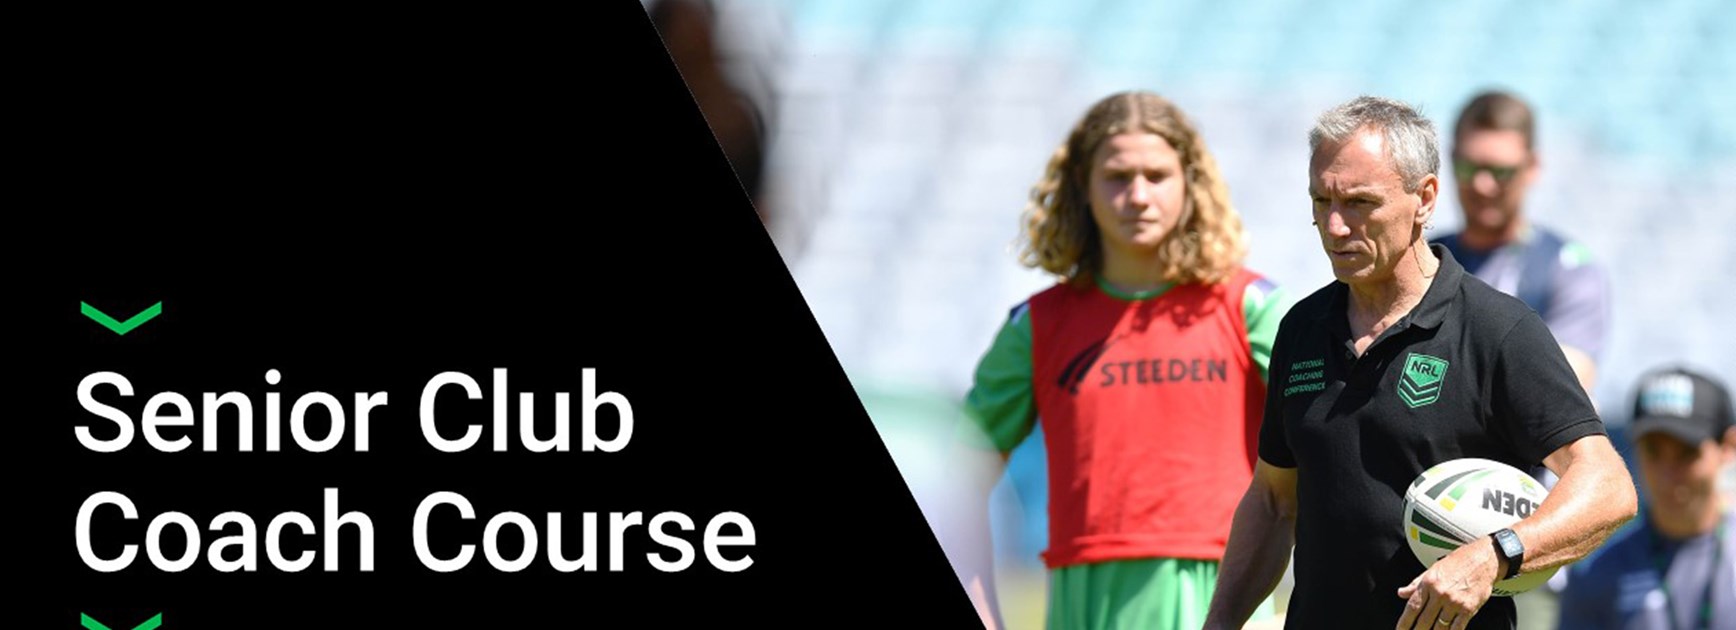 Senior Club Coaching Course Canberra: Applications Open